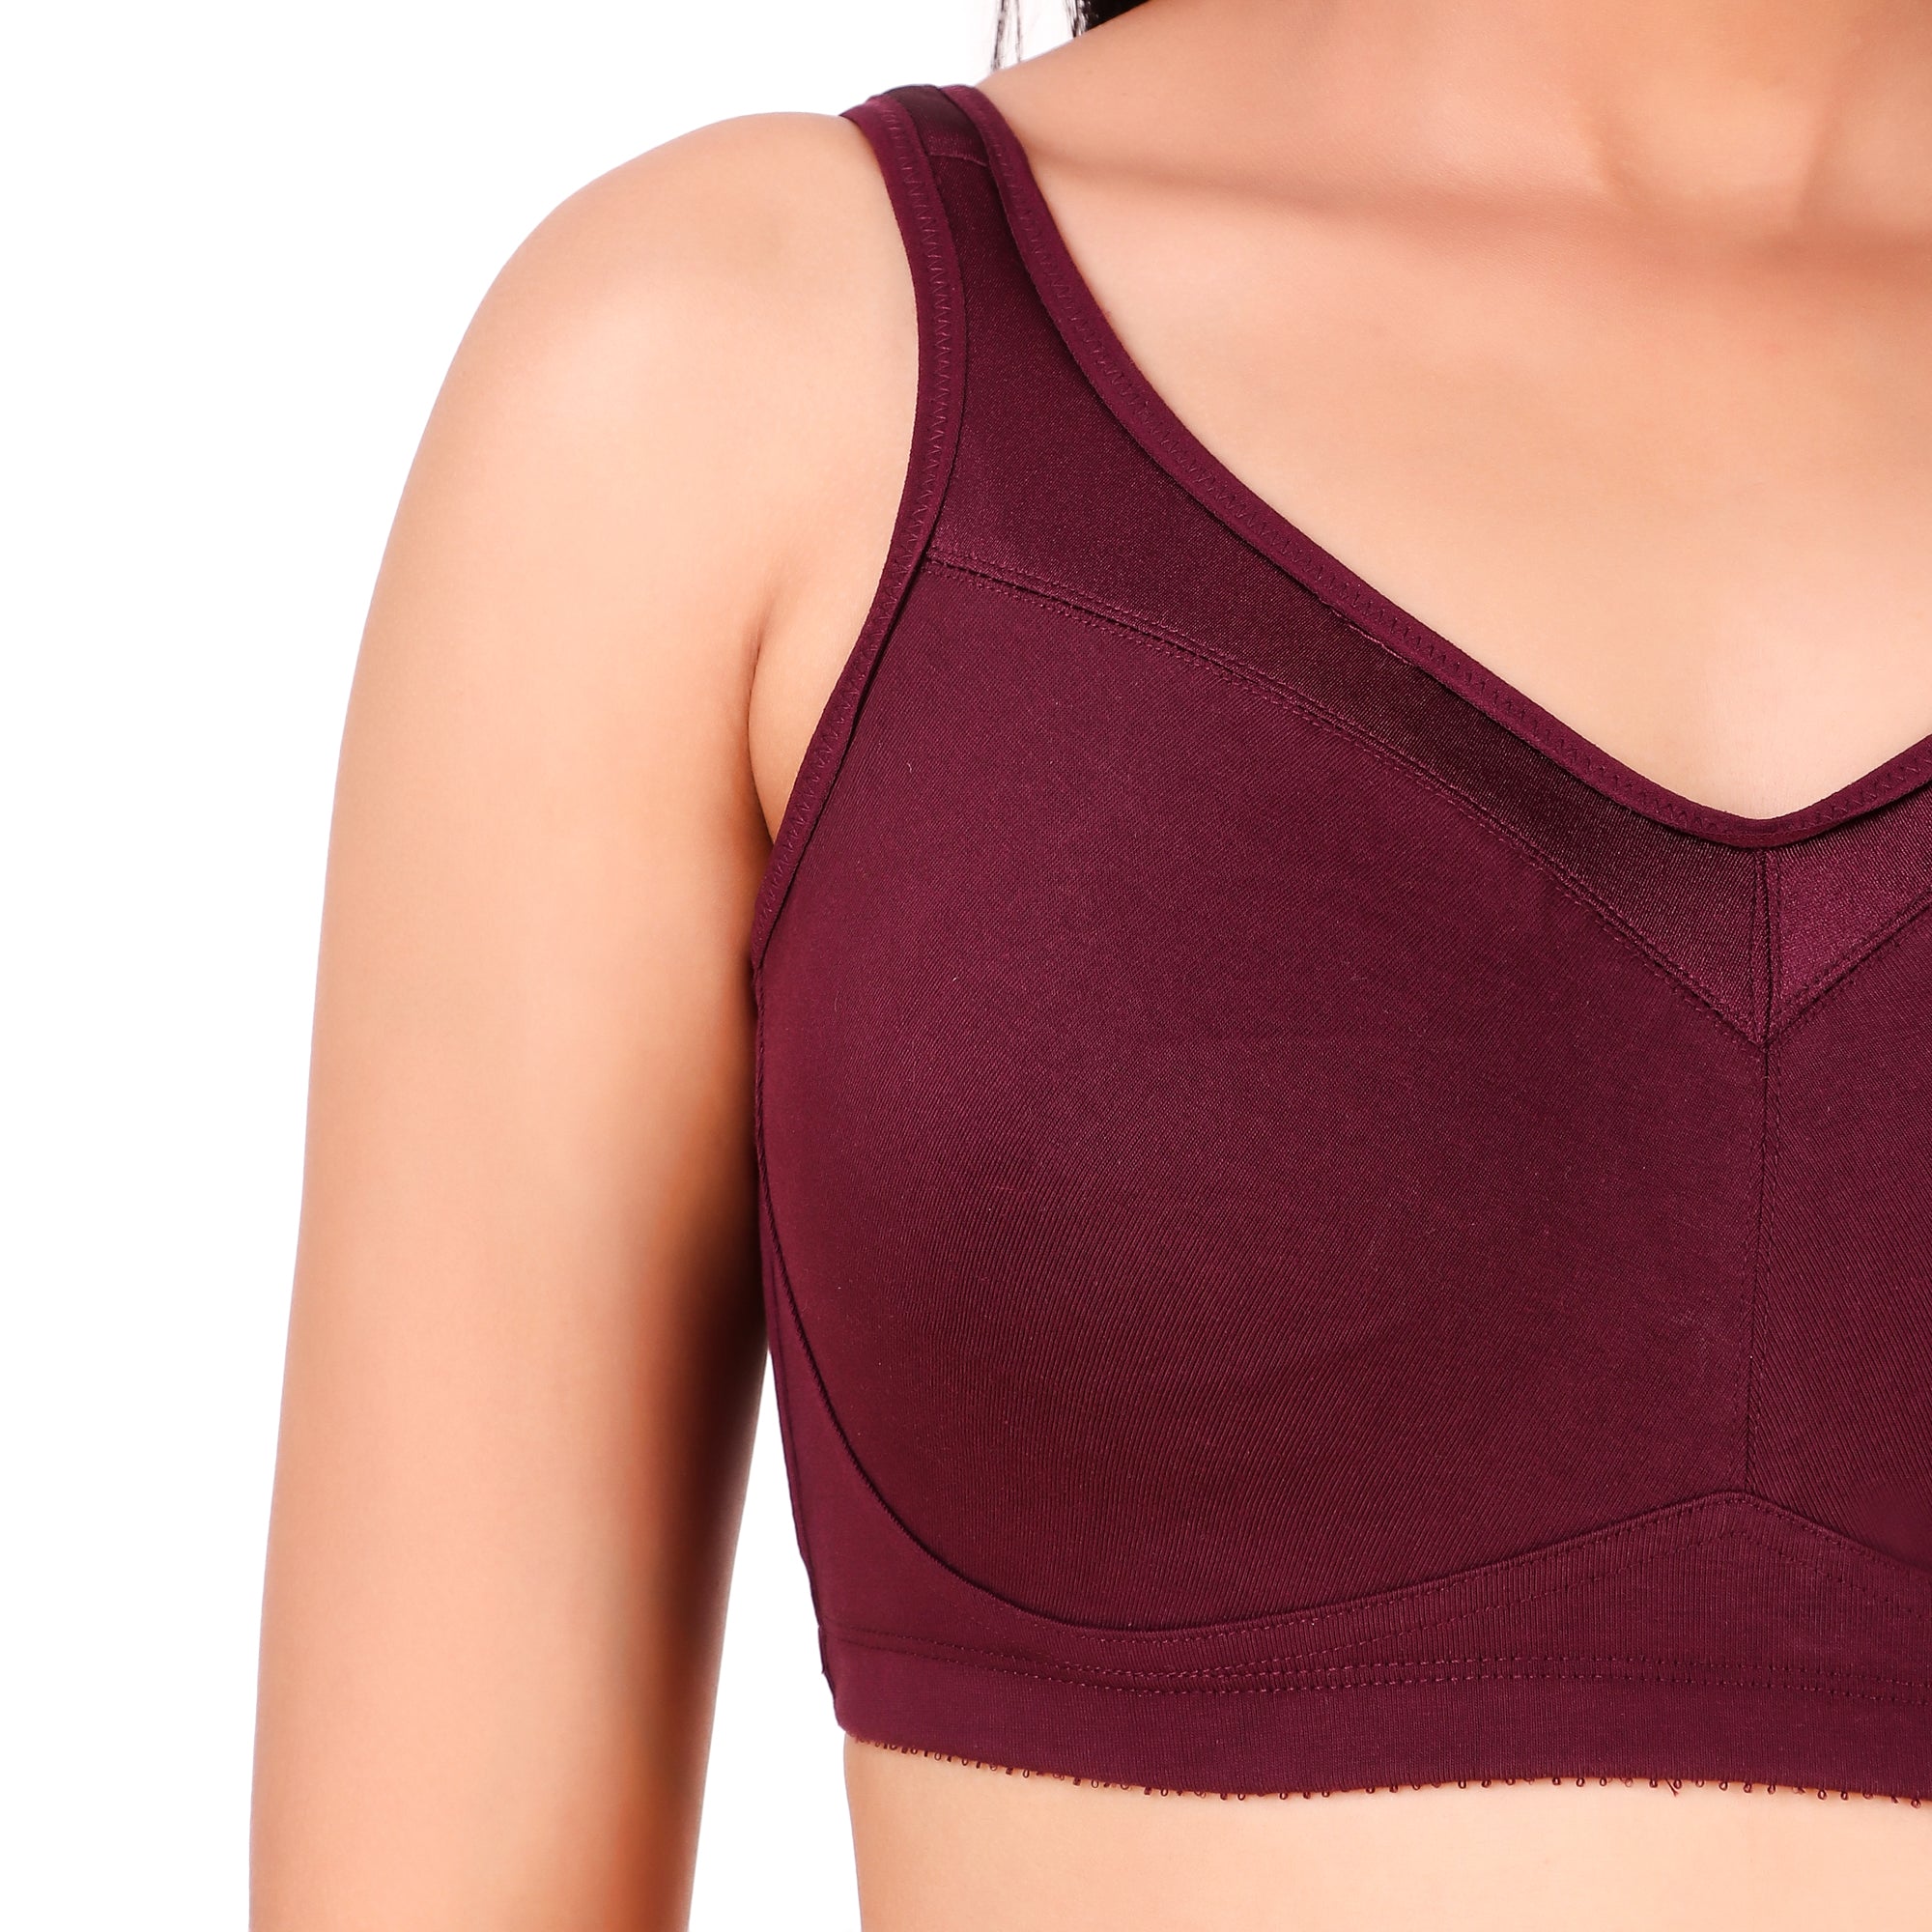 Enamor Women's Smooth Super Lift Classic Full Support Brassiere (model: A112,  Color: Grapewine, Material: Cotton)